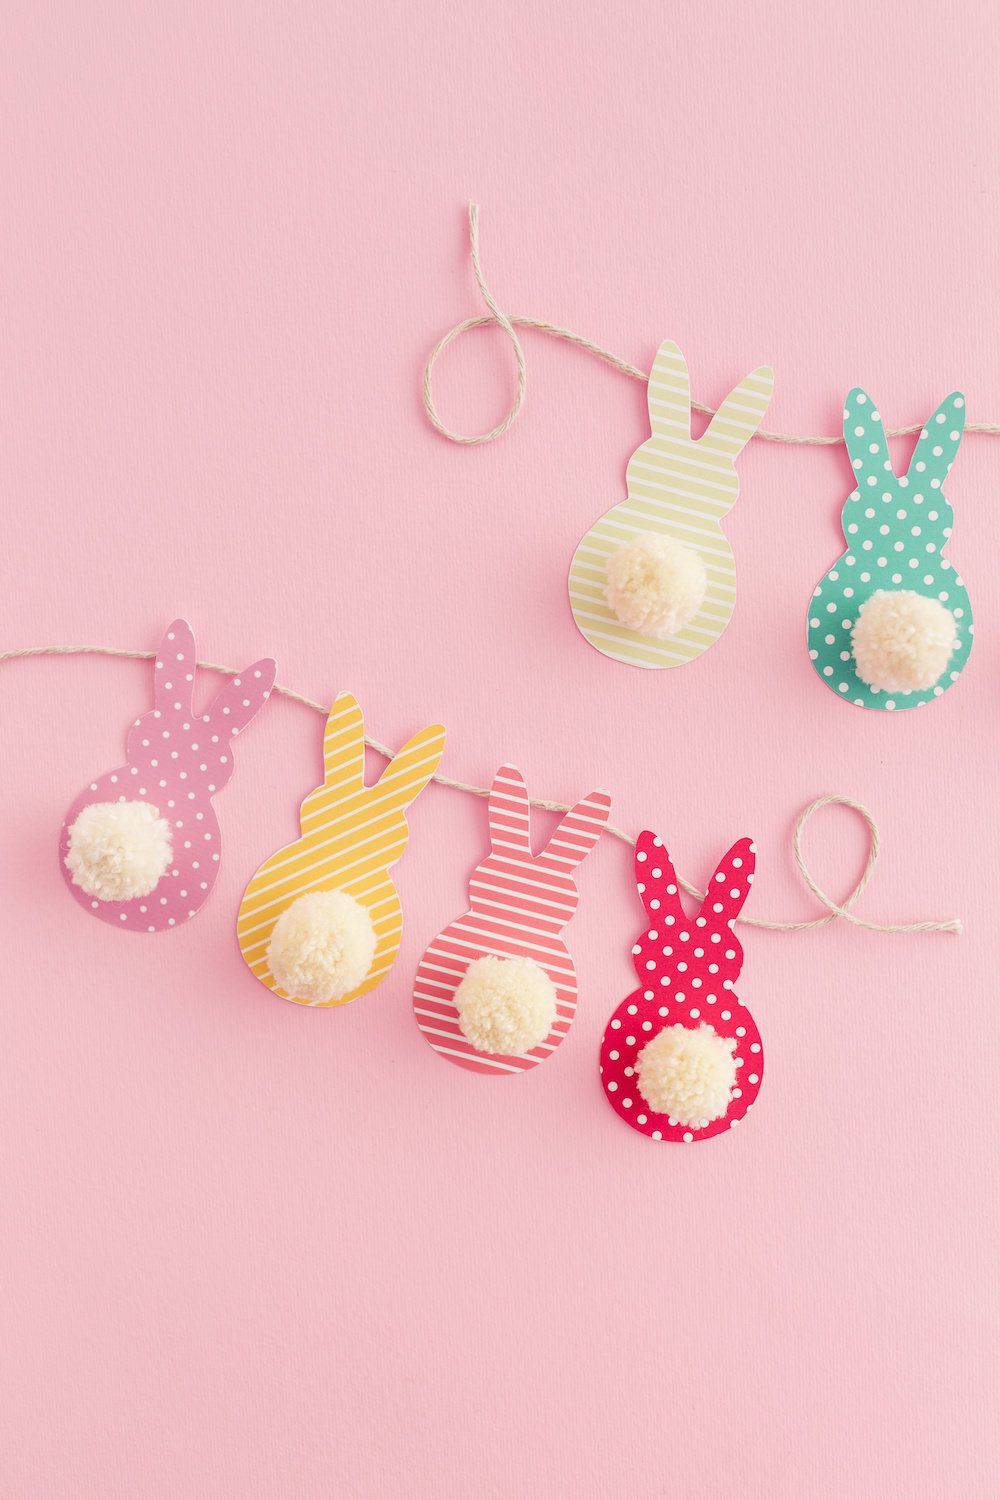 22 DIY Easter Decorations to Make - Homemade Easter Decorating Ideas